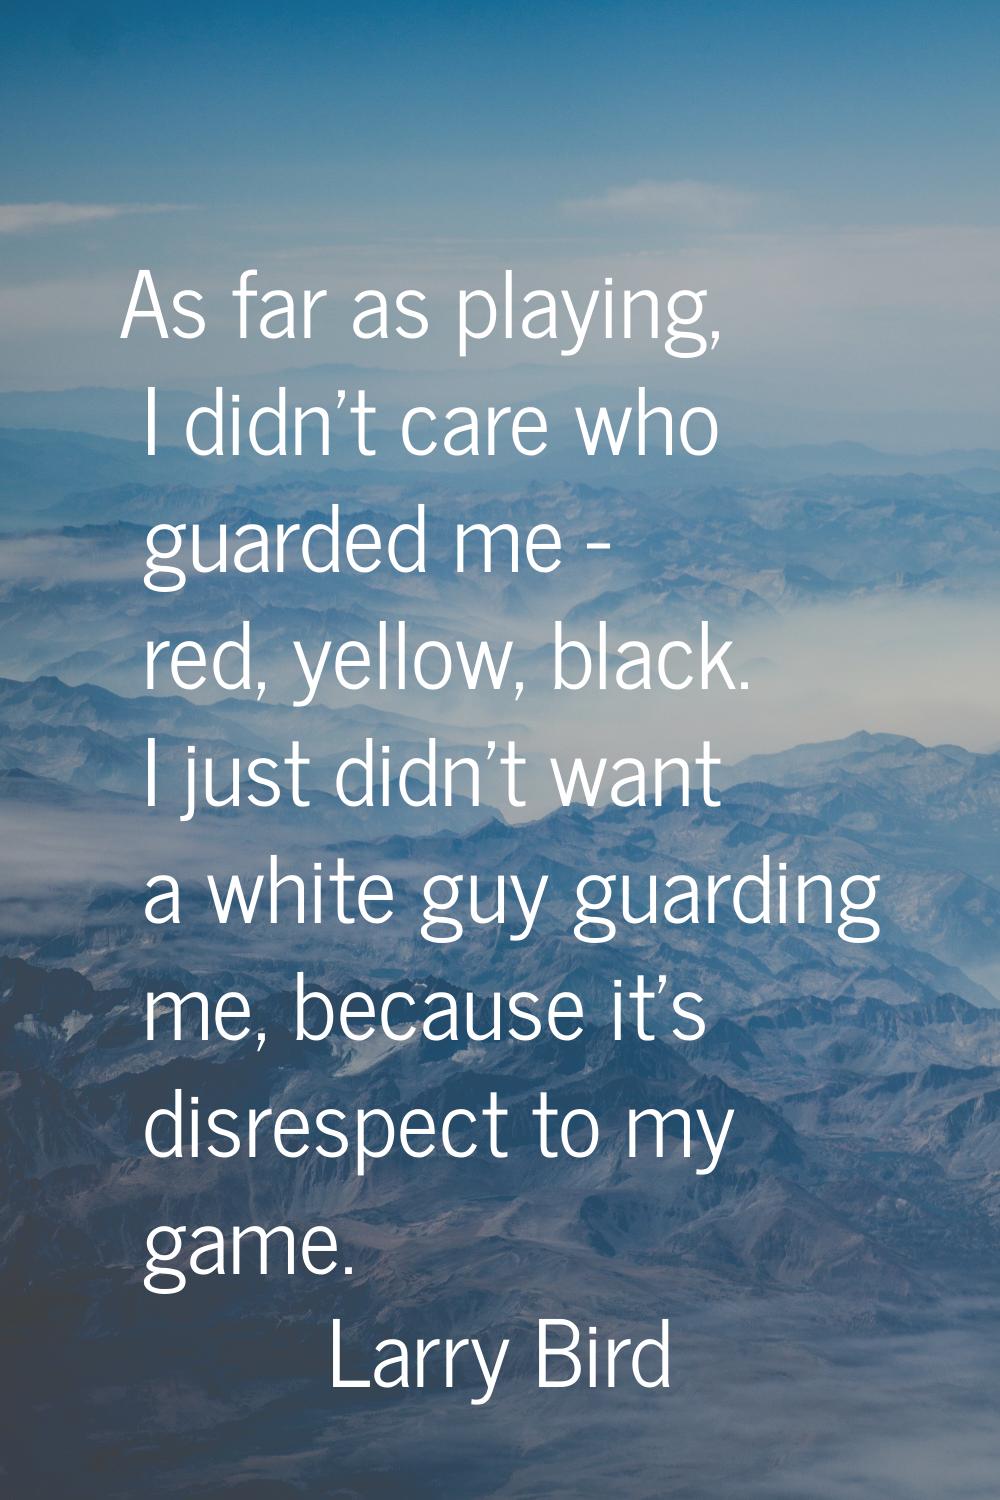 As far as playing, I didn't care who guarded me - red, yellow, black. I just didn't want a white gu